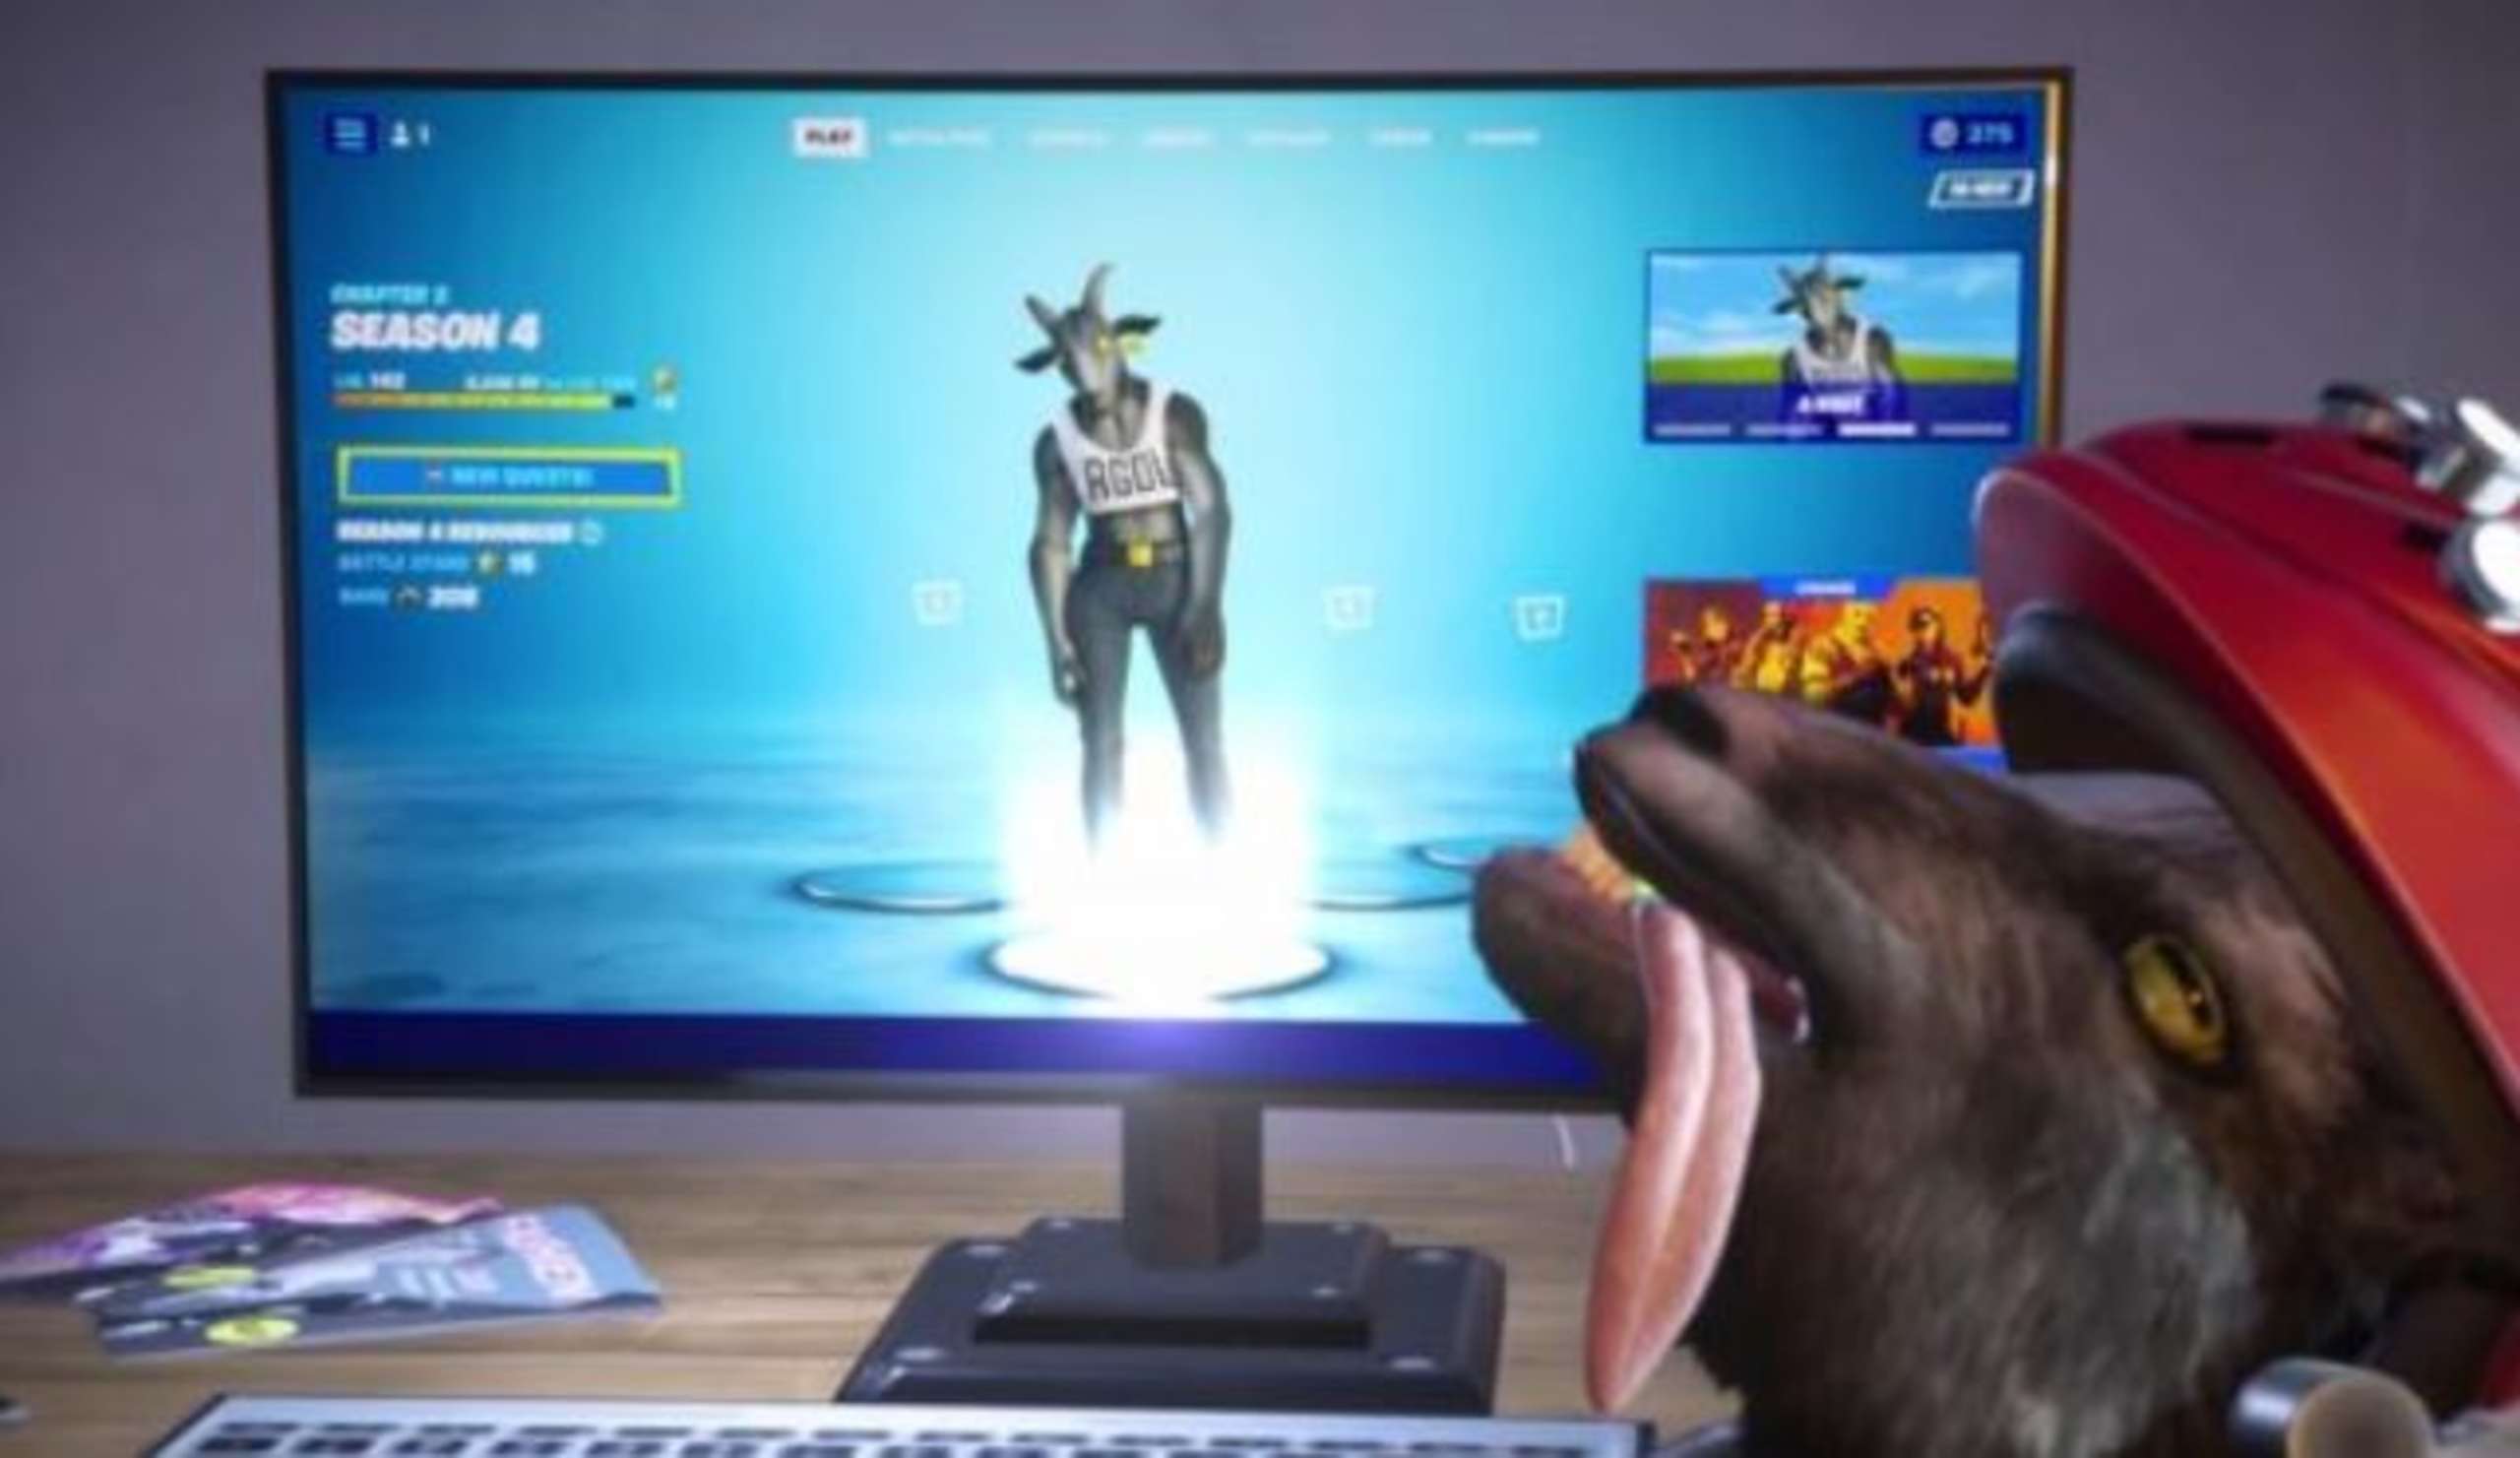 Fortnite’s Battle Royale Mode For Those Who Pre-Order The Independent Game Goat Simulator 3, The Game’s Goat Character Will Be Available To Play